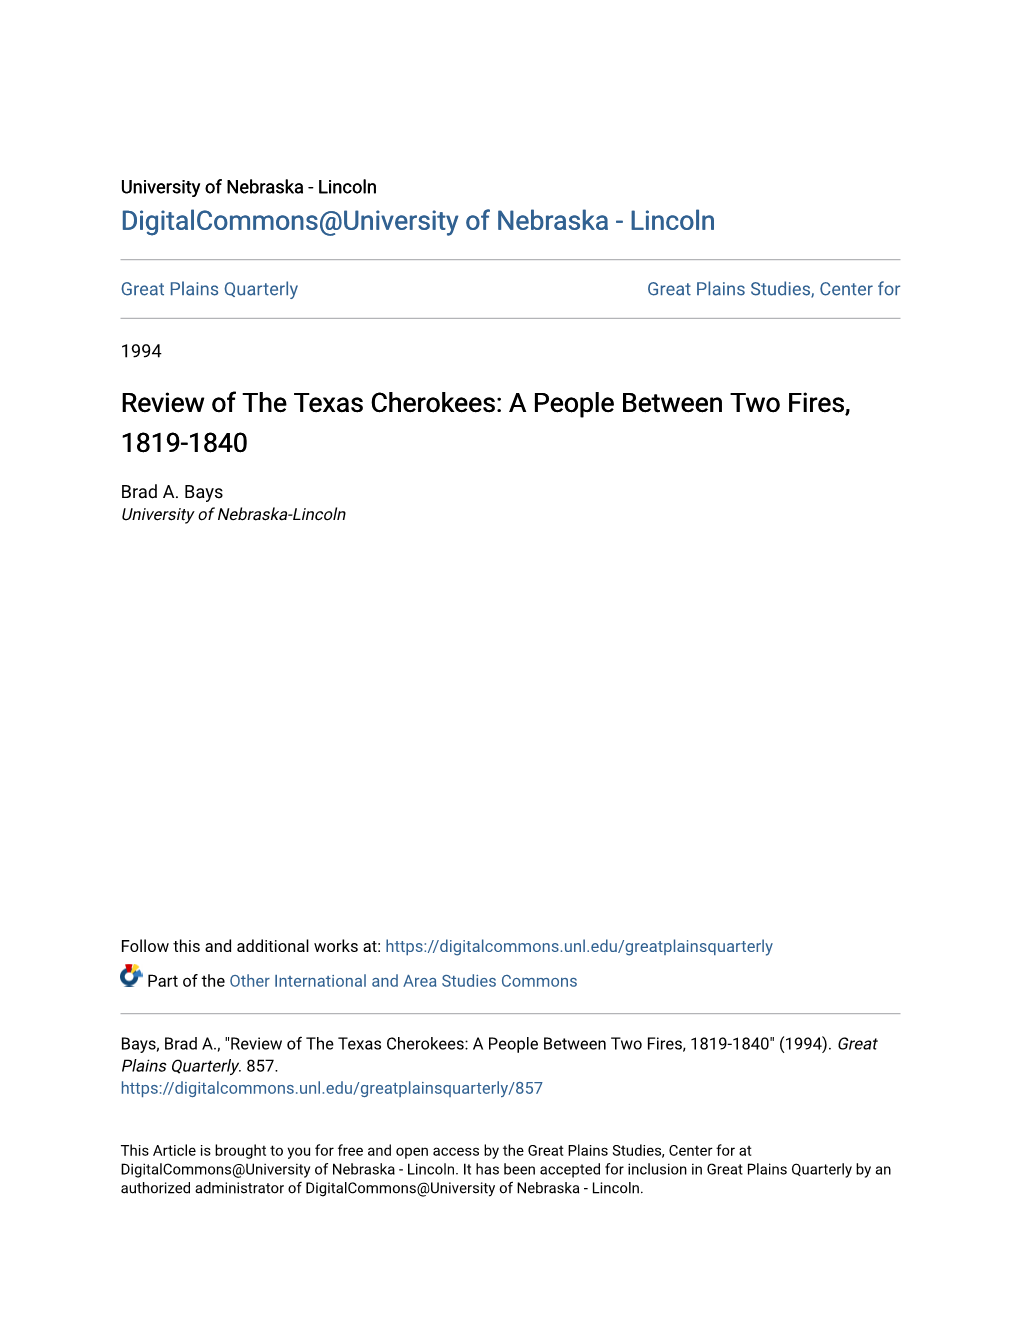 Review of the Texas Cherokees: a People Between Two Fires, 1819-1840